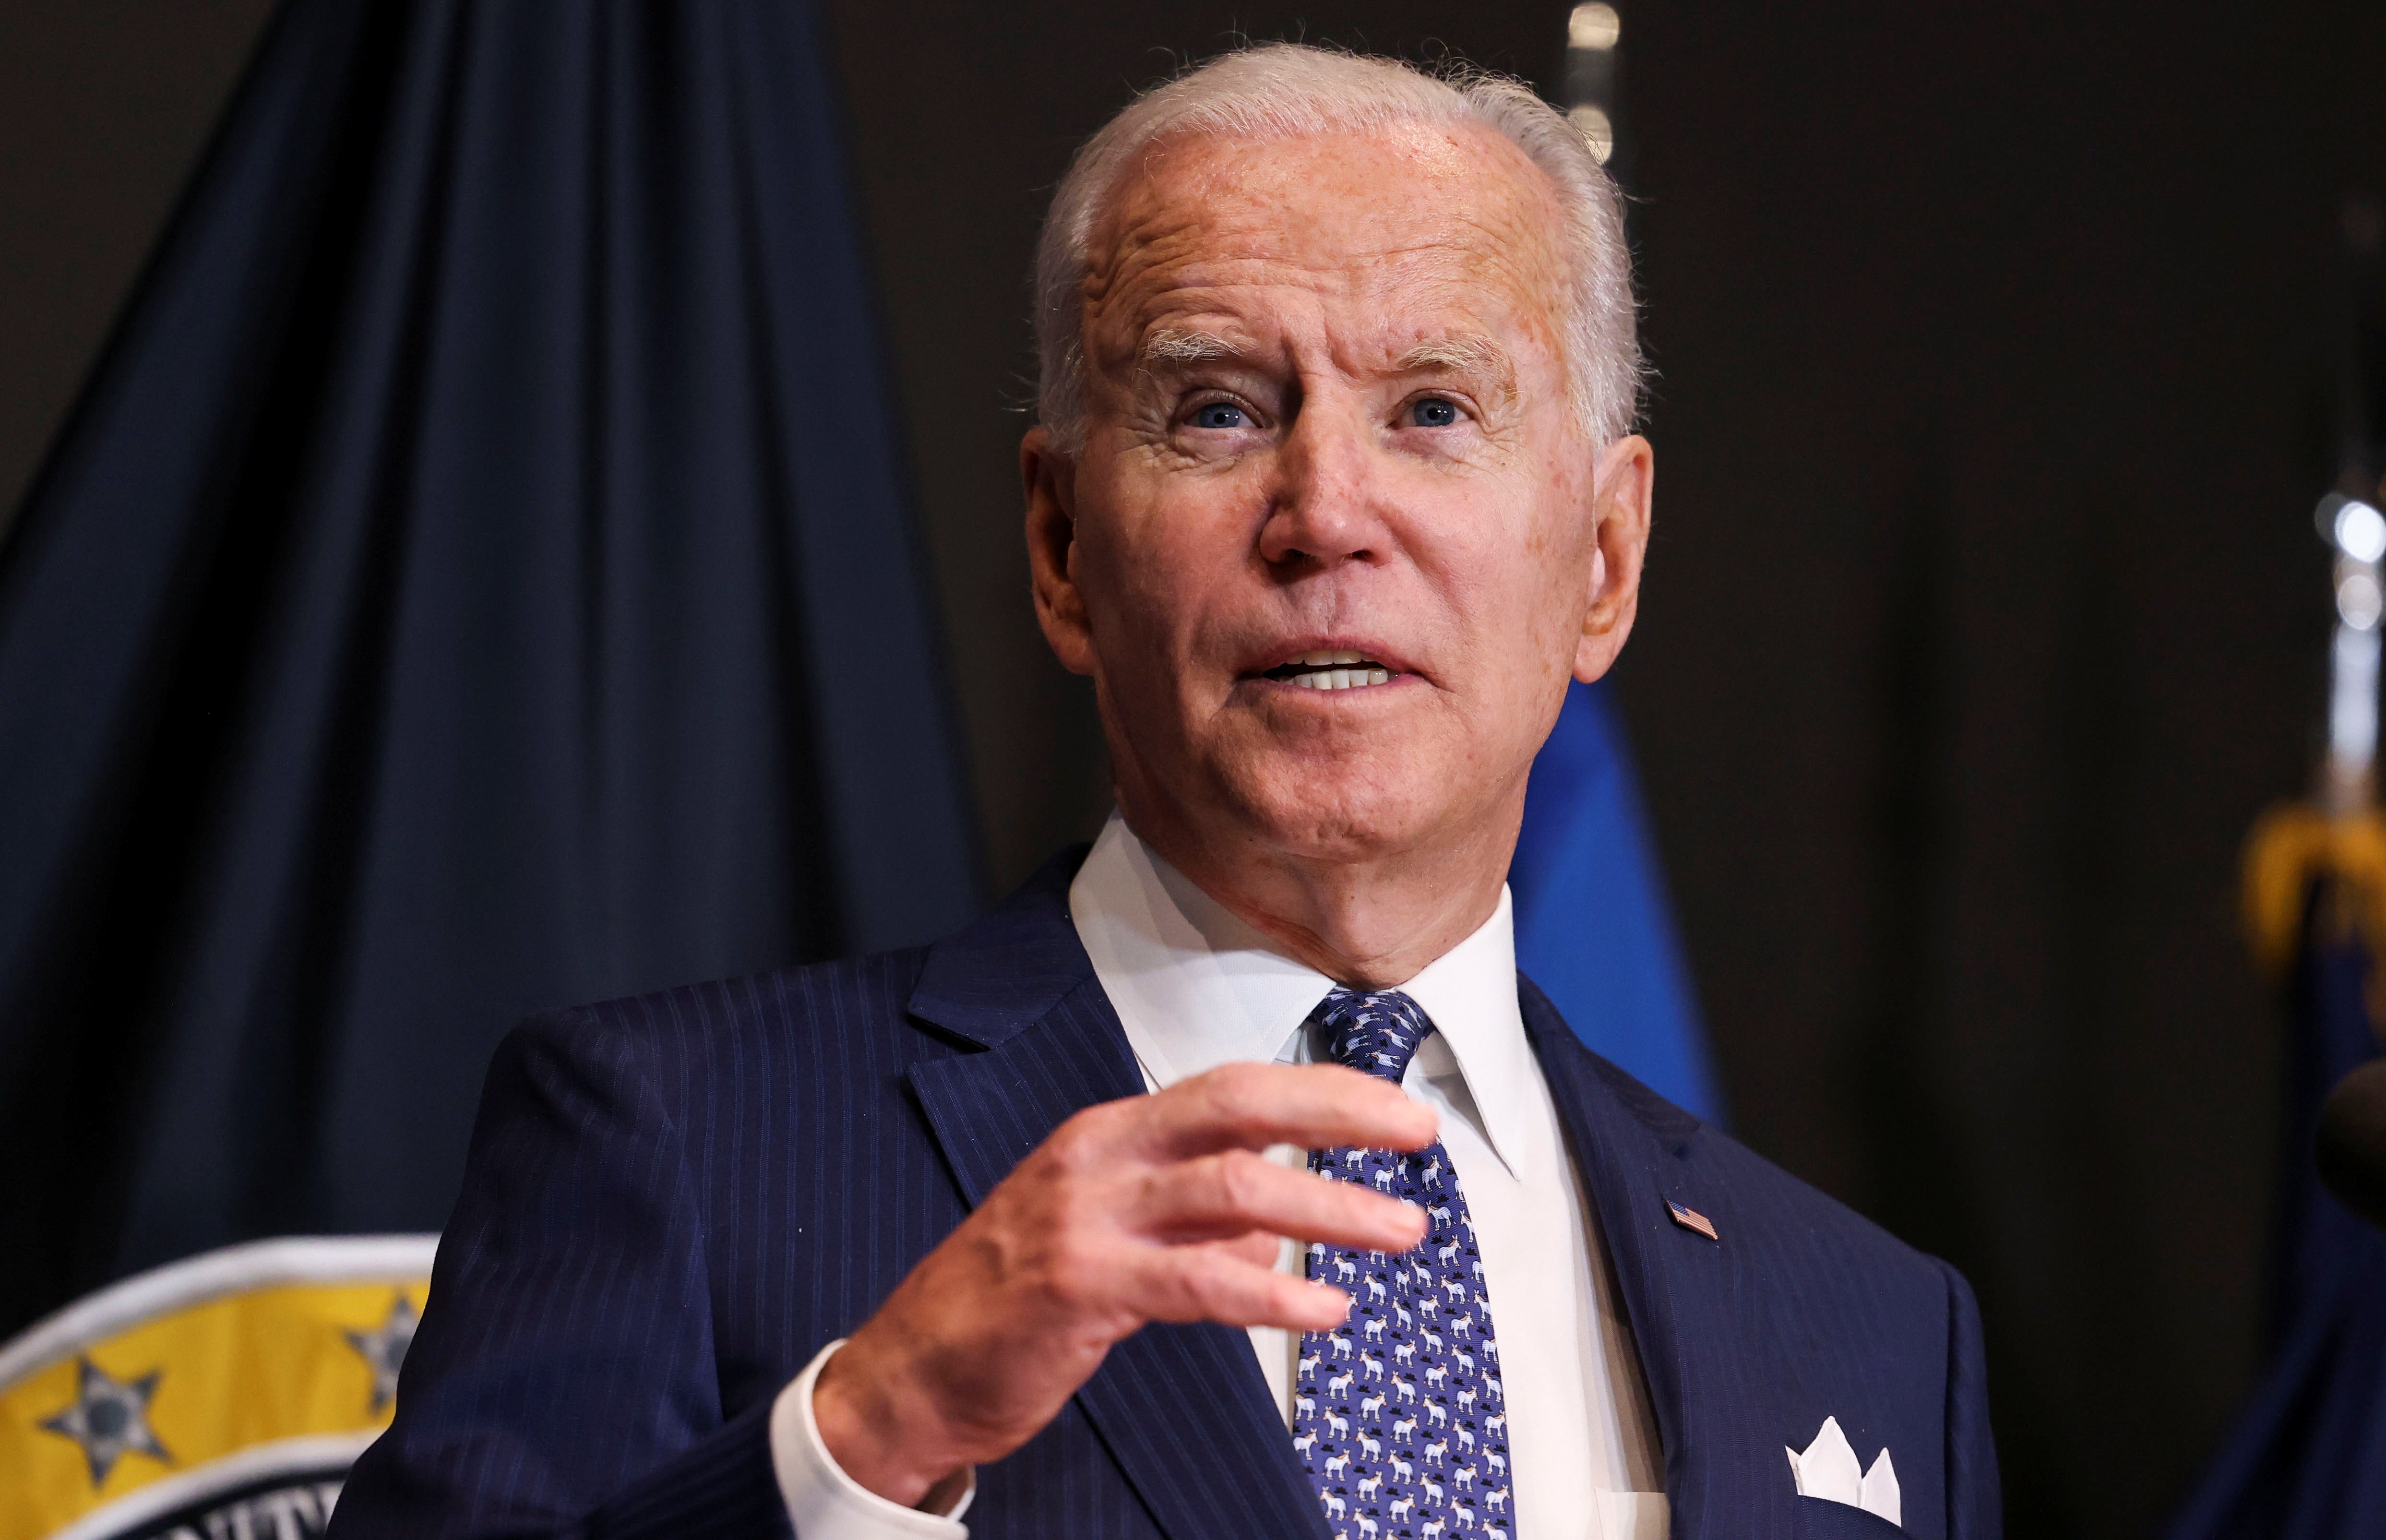 File: Joe Biden delivers remarks as he visits the Office of the Director of National Intelligence in McLean, Virginia on 27 July 2021